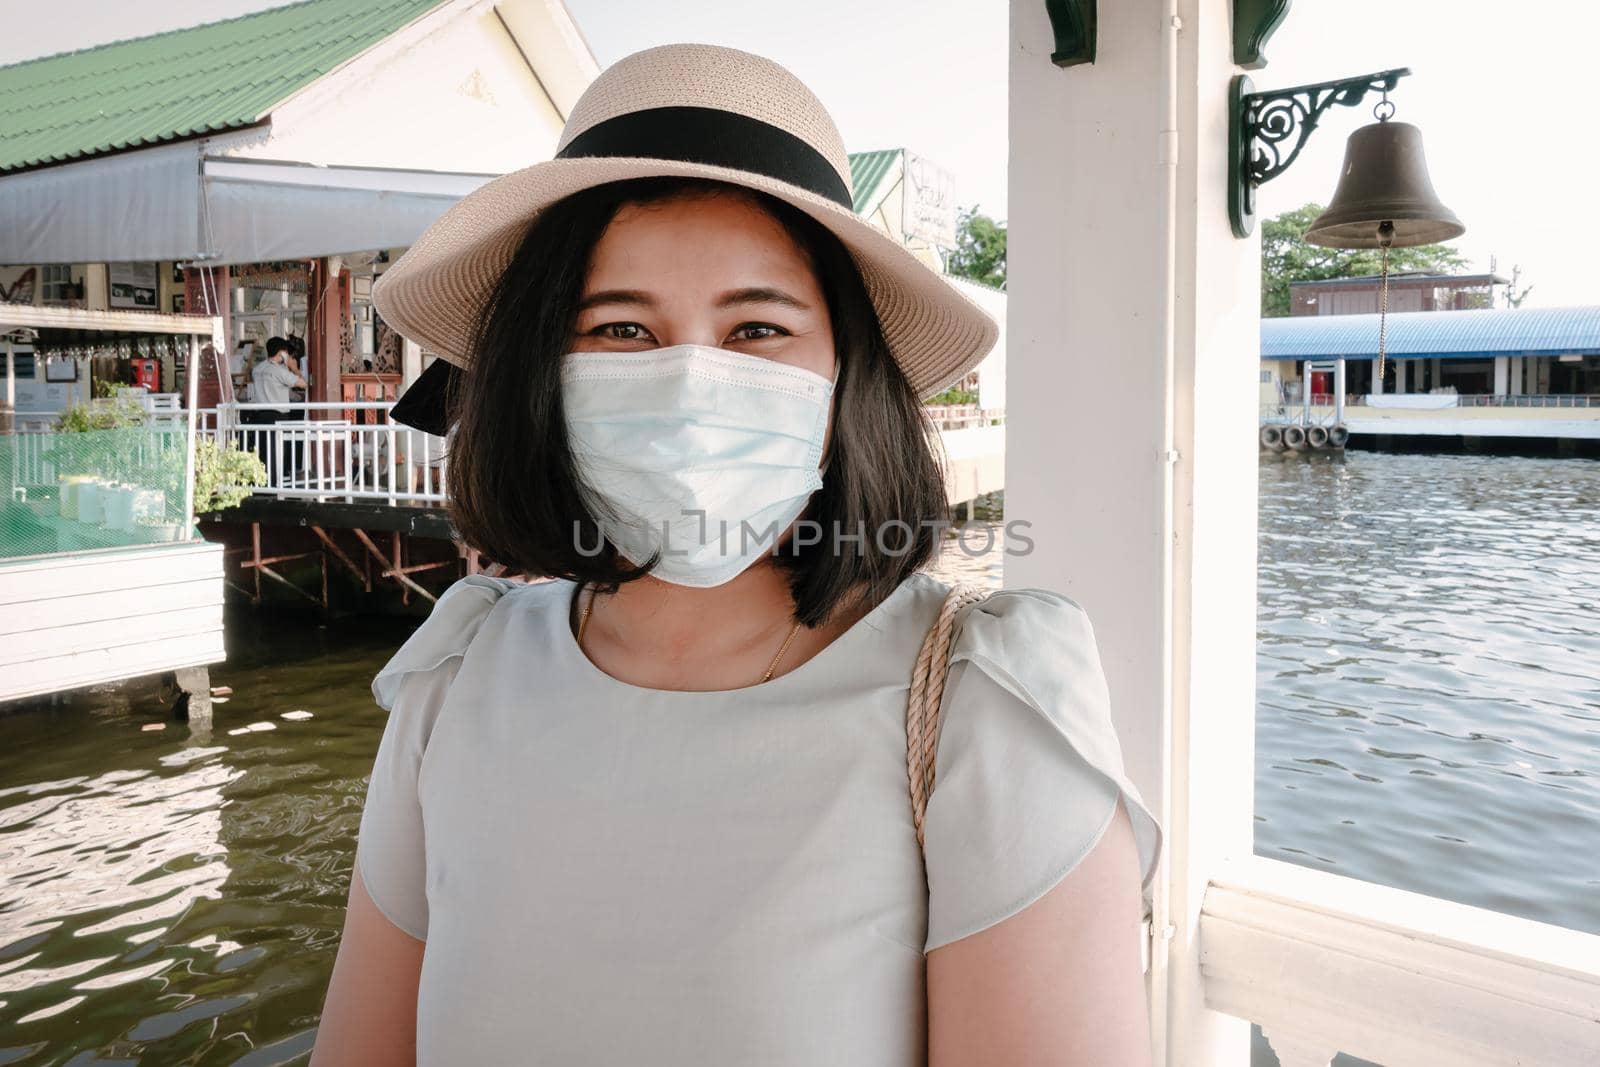 Smile Tourist Woman Having Fun While Sightseeing Bangkok Cityscape beside The River, Portrait of Happy Smiling Tourist Woman in Wearing Face Mask During New Normal Covid-19 Situation. Travel Concept